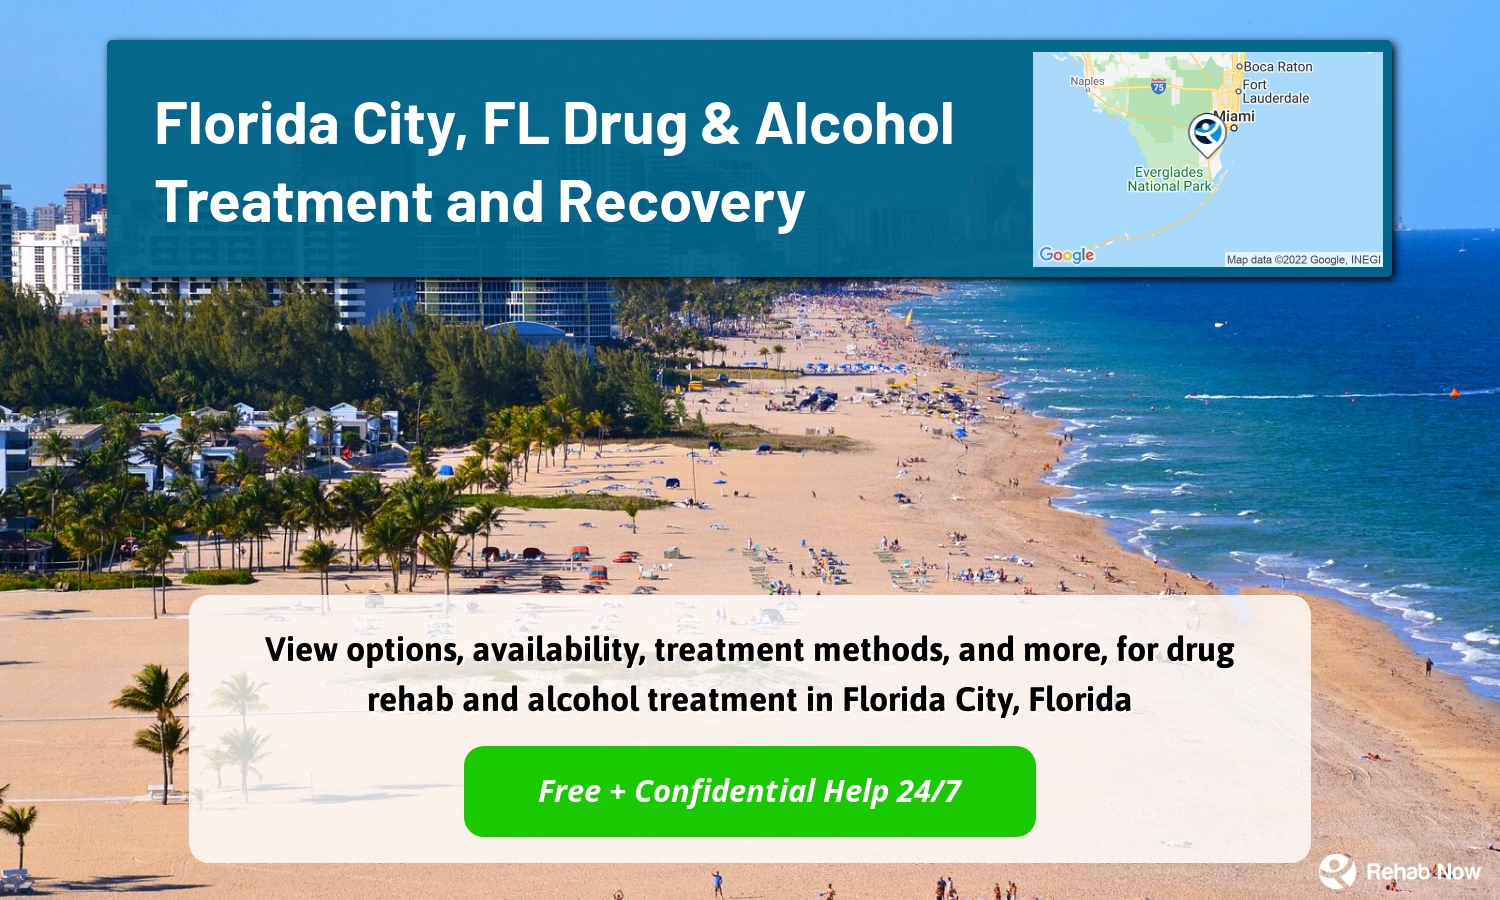 View options, availability, treatment methods, and more, for drug rehab and alcohol treatment in Florida City, Florida